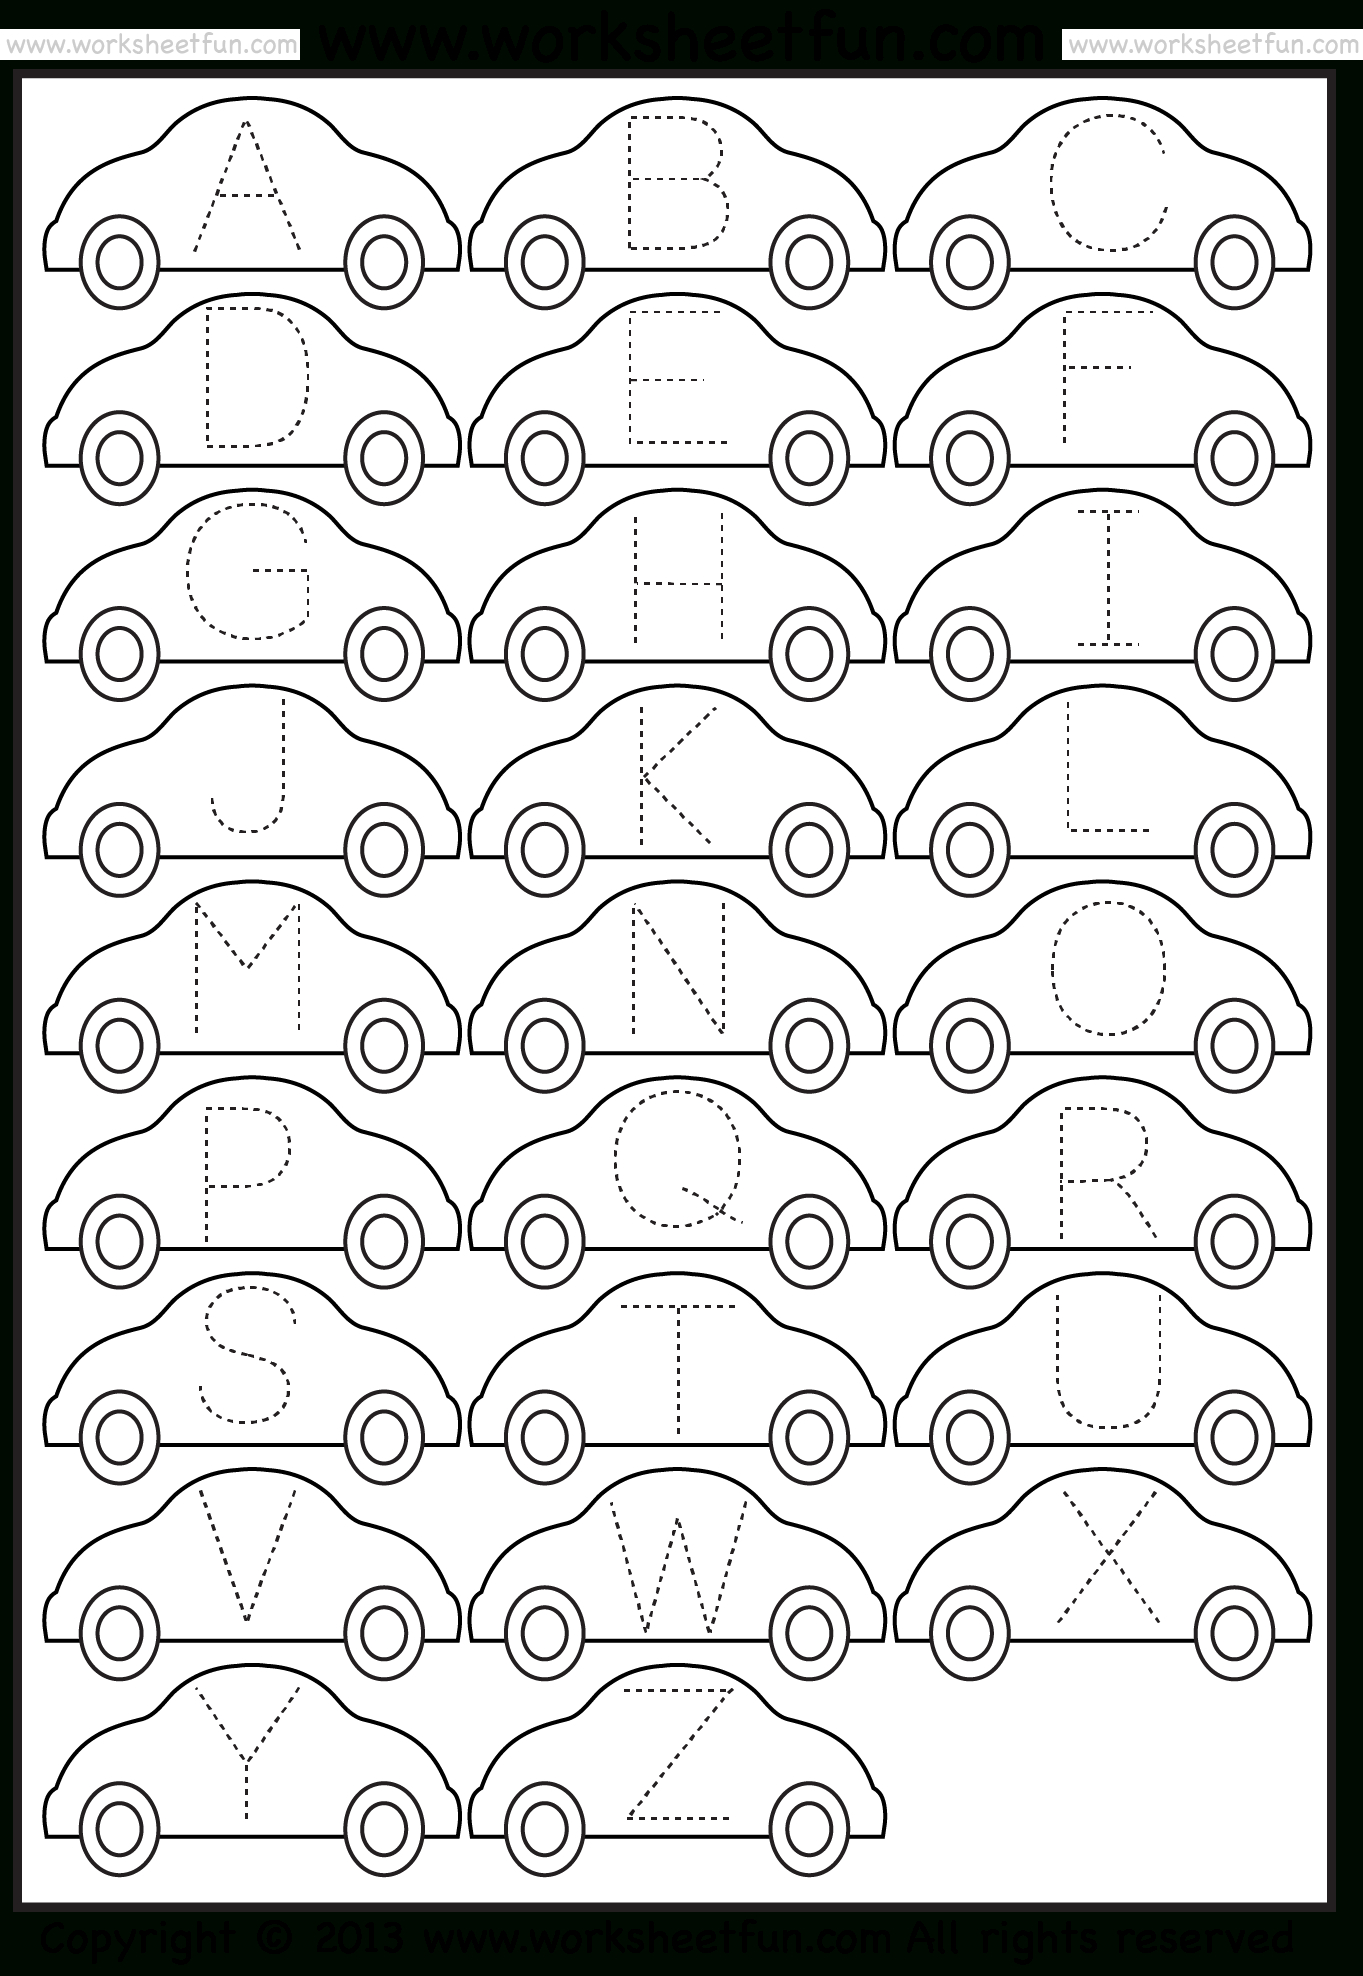 Tracing – Letter Tracing / Free Printable Worksheets – Worksheetfun | Printable Tracing Worksheets